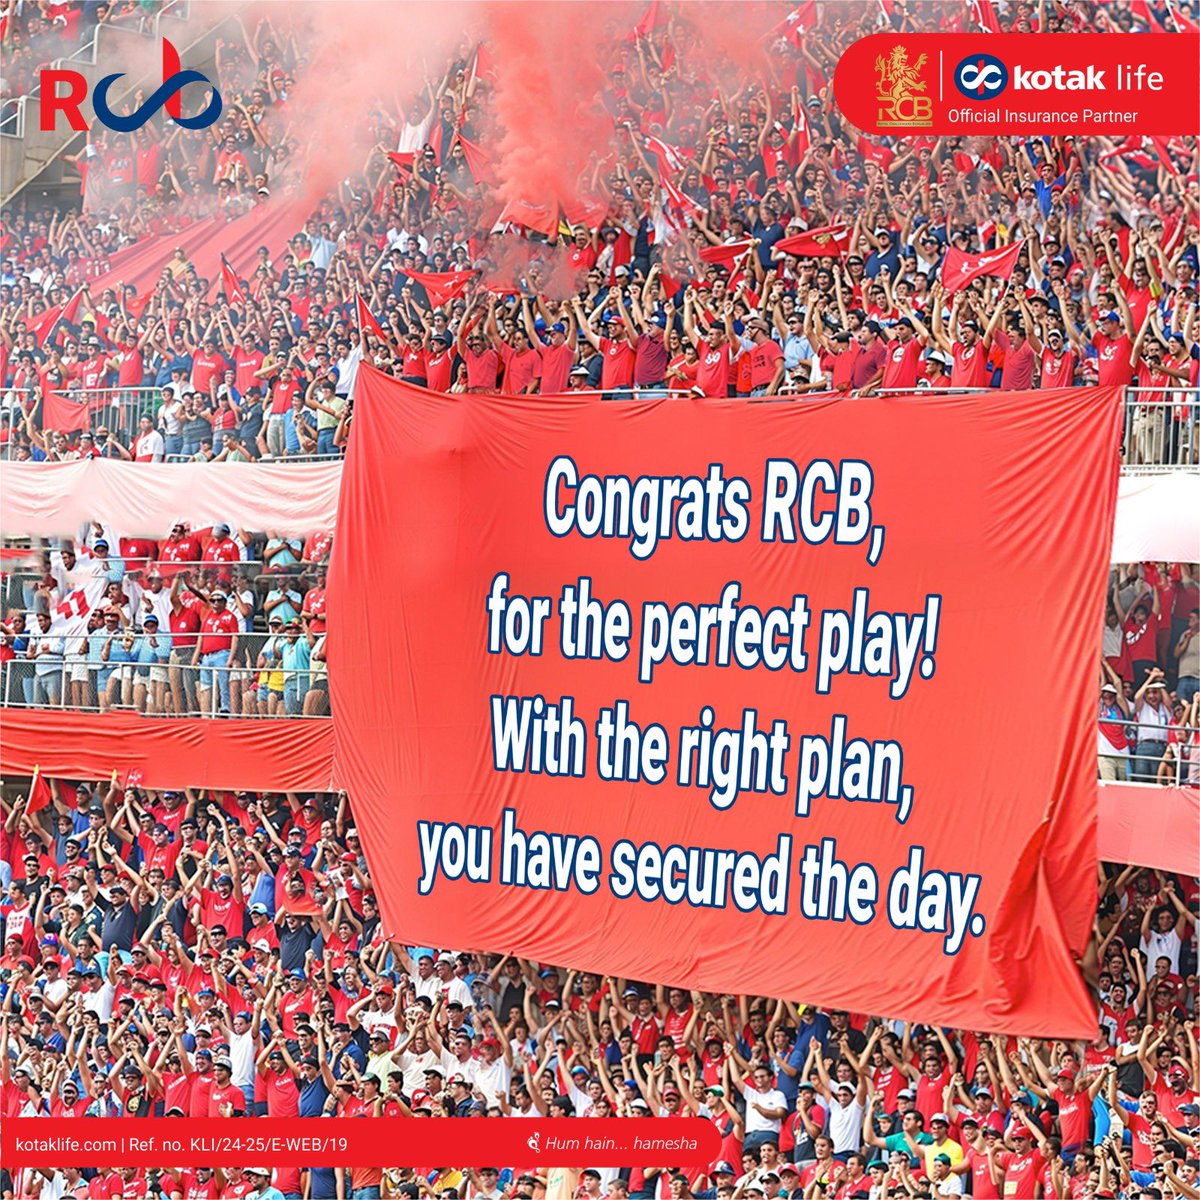 Our Men in RED march ahead with another spectacular victory. Just like @RCBTweets , you too can bounce back from any setback with the right plan.

T&C: bit.ly/3PvqsyJ

#KotakLife #HameshaWithRCB #ipl2024 #lifeinsurance